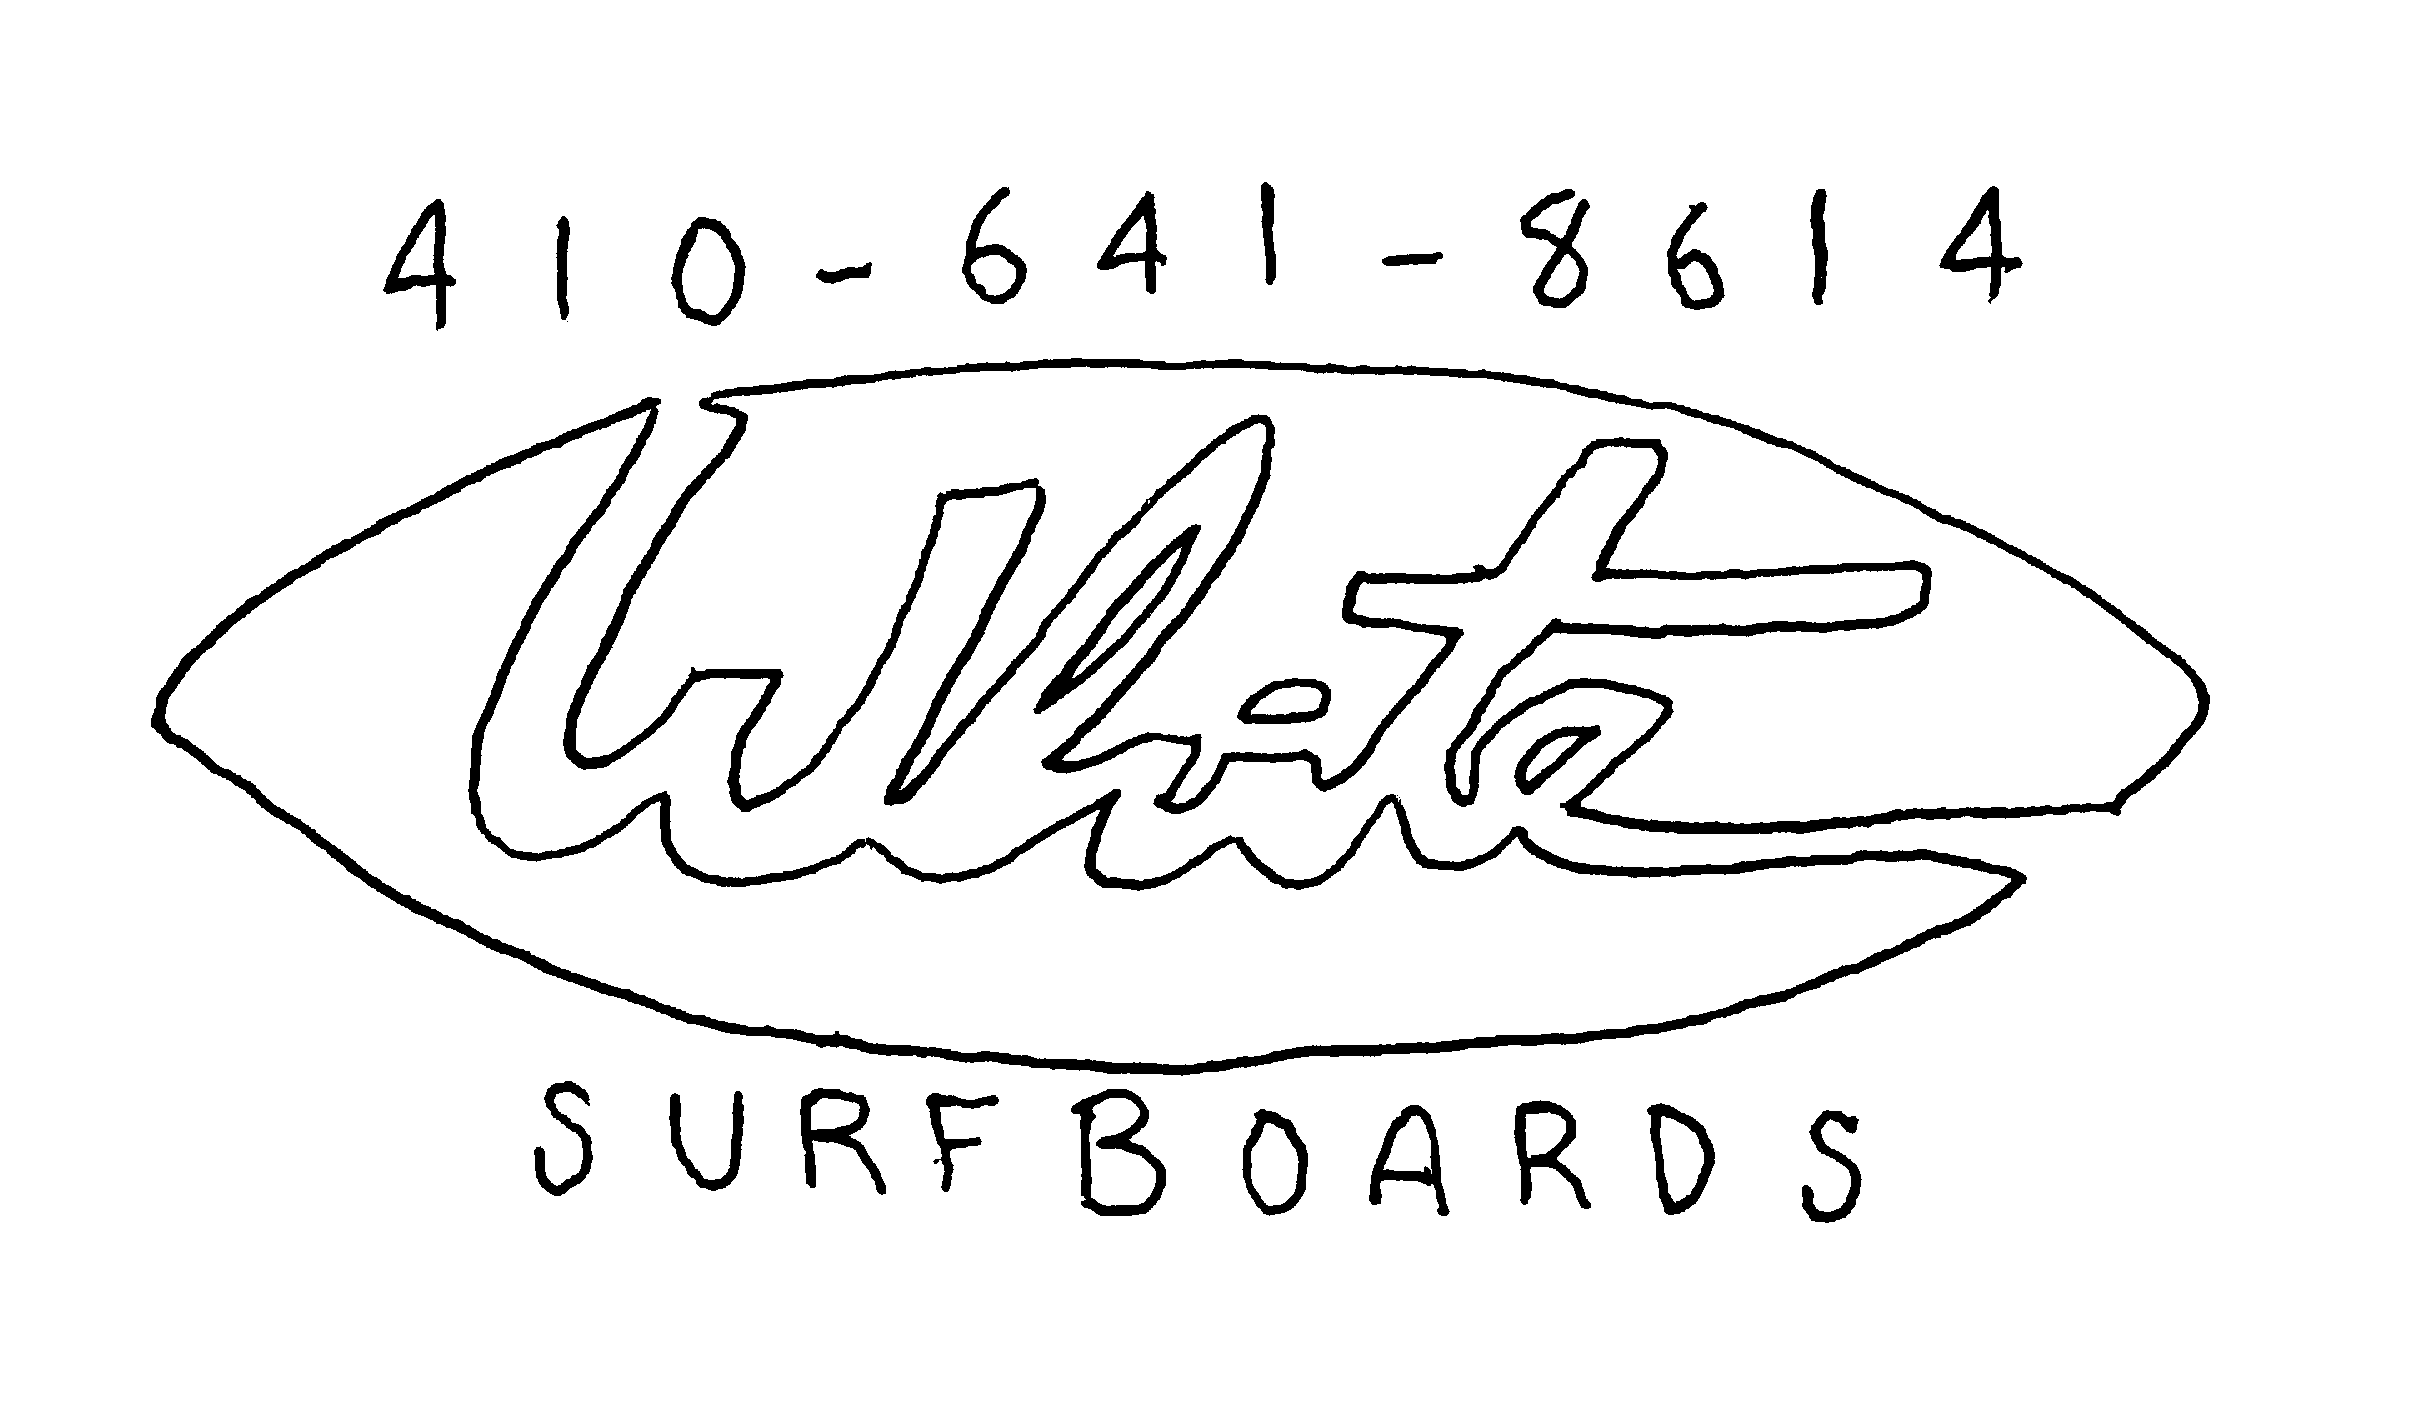  WHITE SURFBOARDS